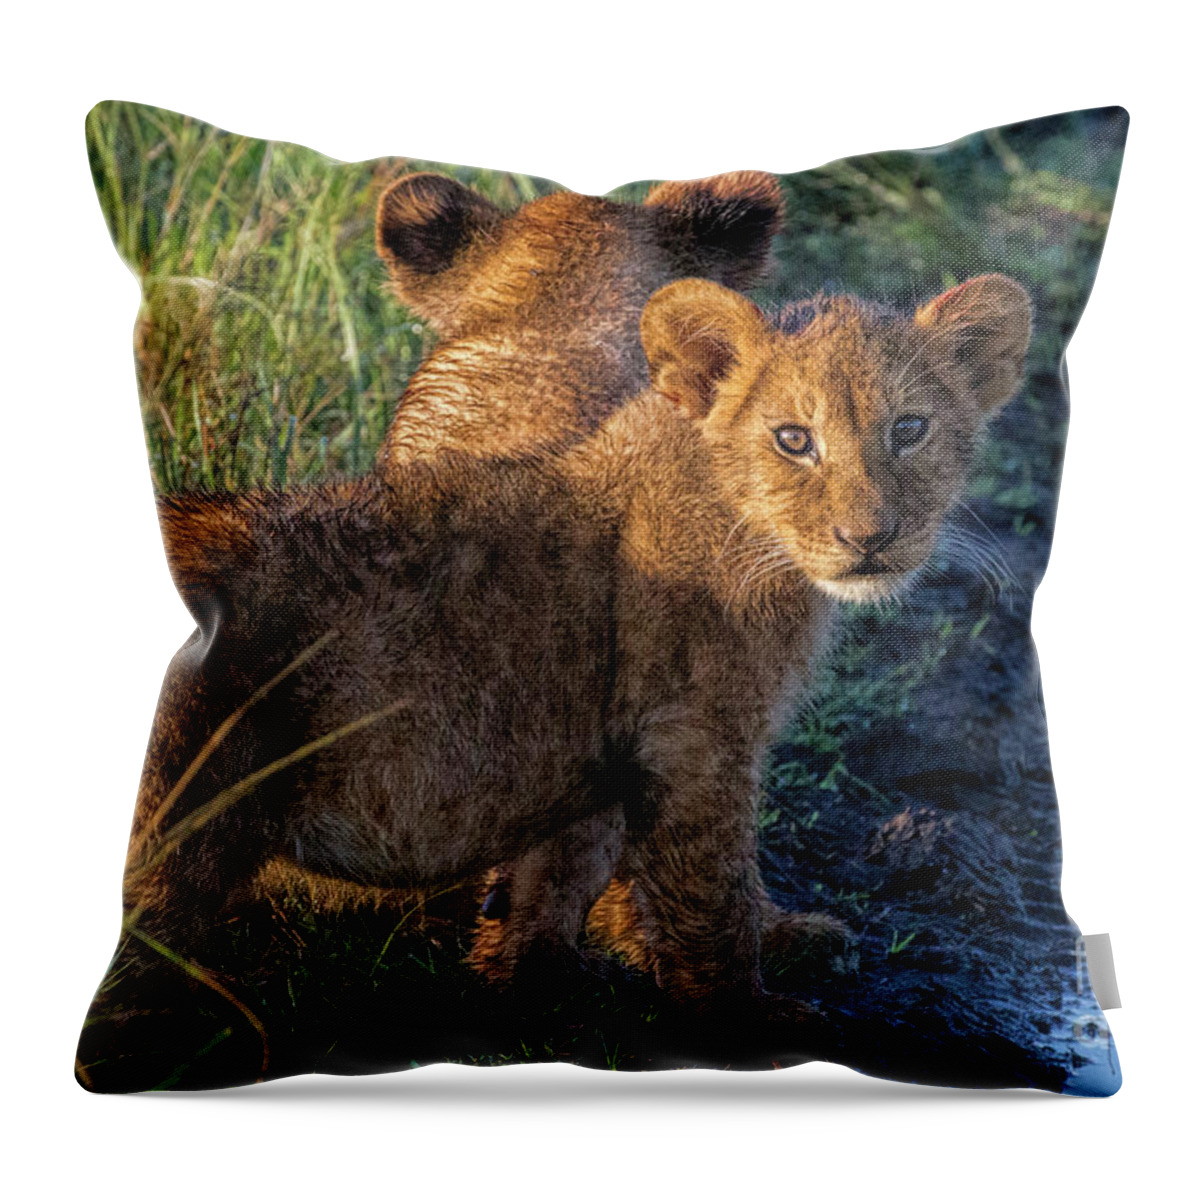 Lion Cubs Throw Pillow featuring the photograph Double Trouble by Karen Lewis